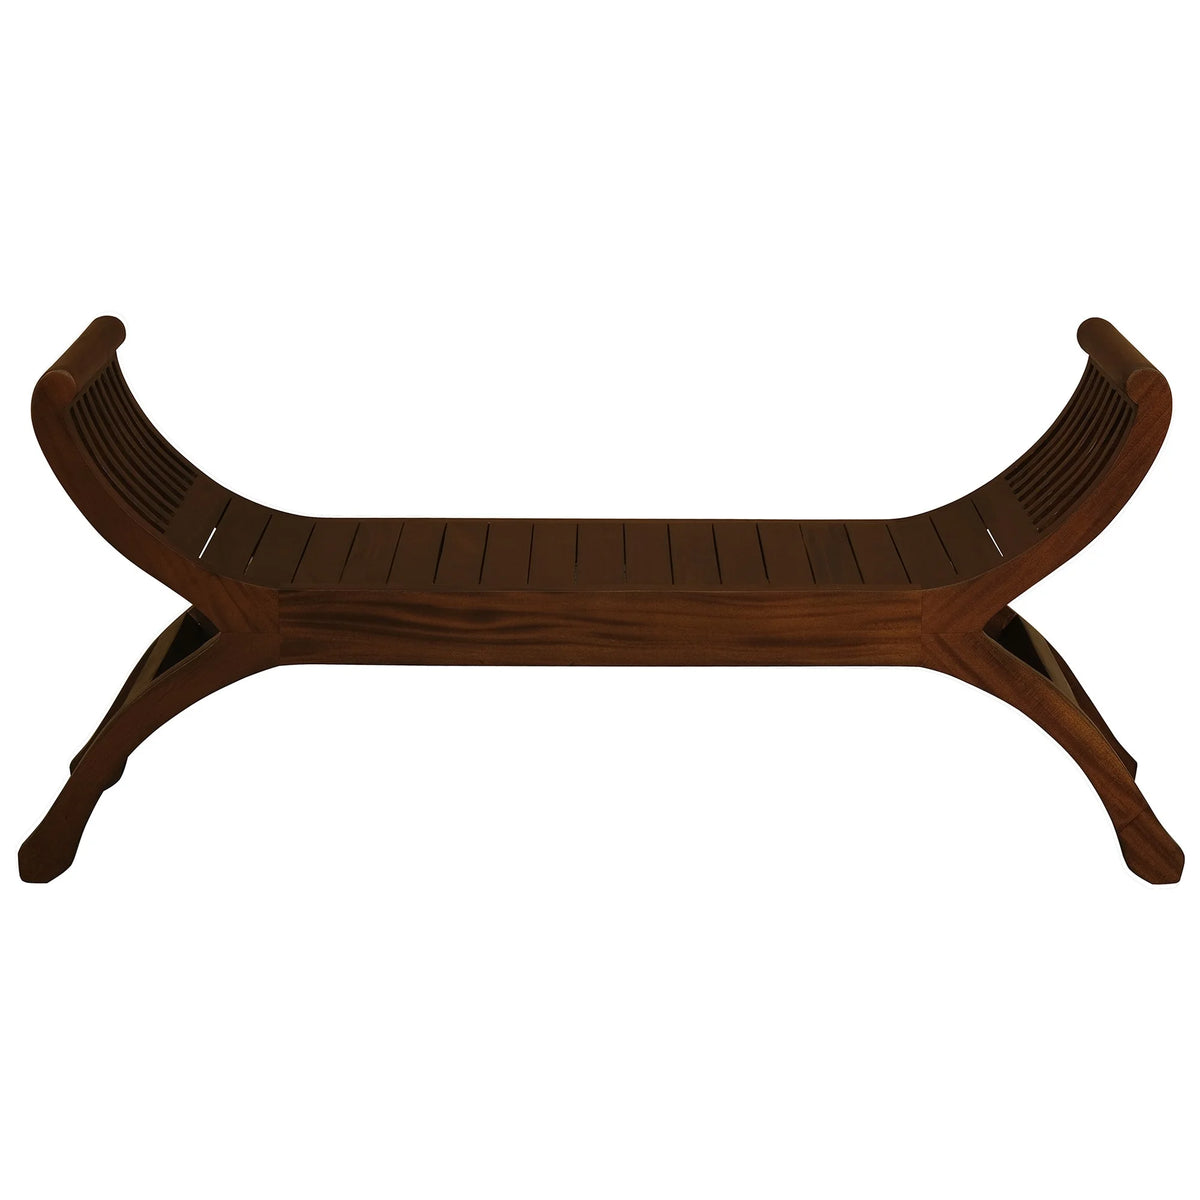 Maeve Solid Mahogany Timber Curved Bench in Mahogany - 130cm - Notbrand